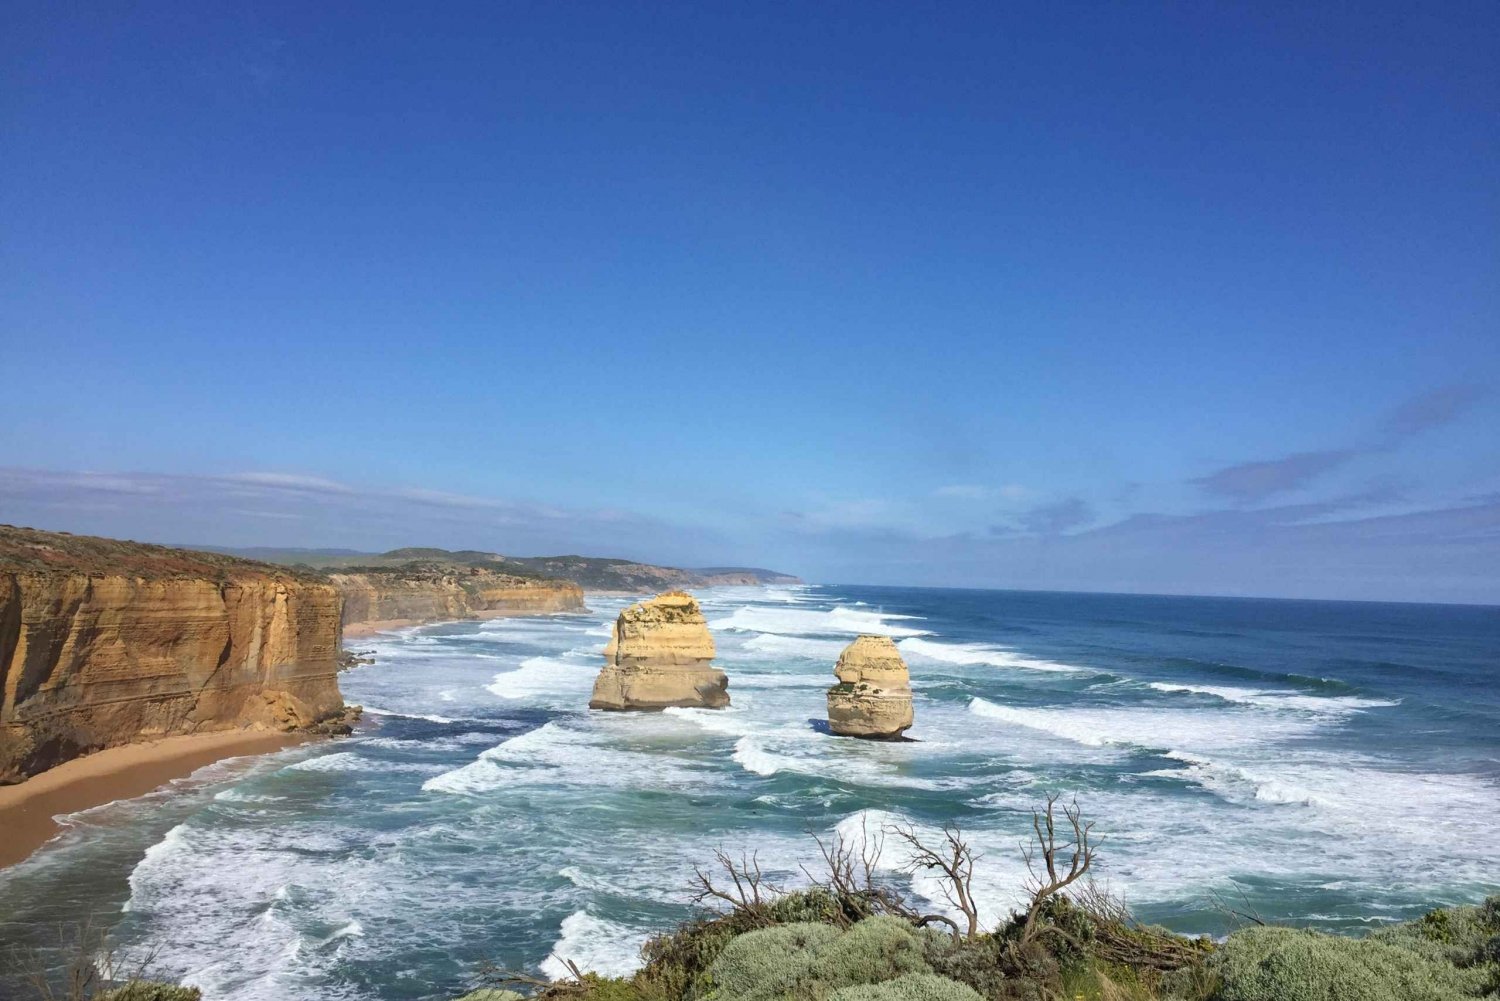 Private Tour of the Great Ocean Road & 12 Apostles